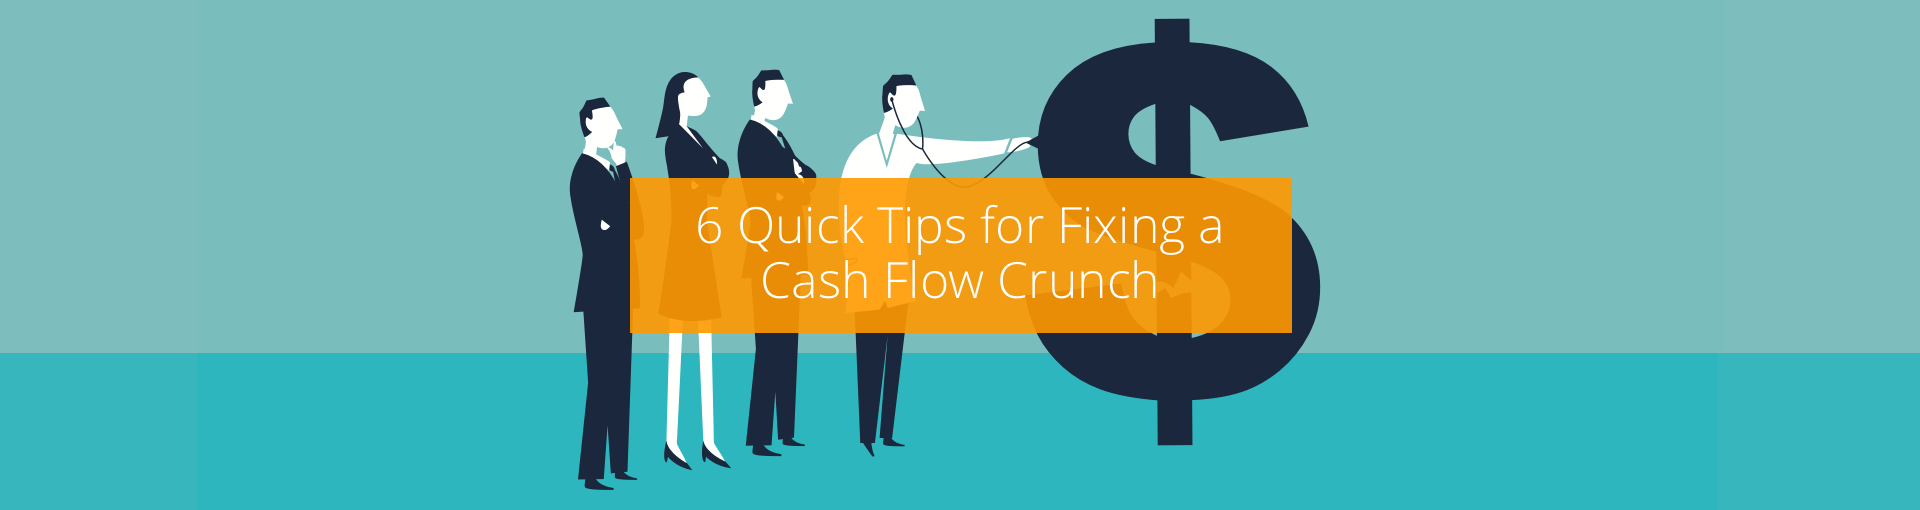 6 Quick Tips for Fixing a Cash Flow Crunch